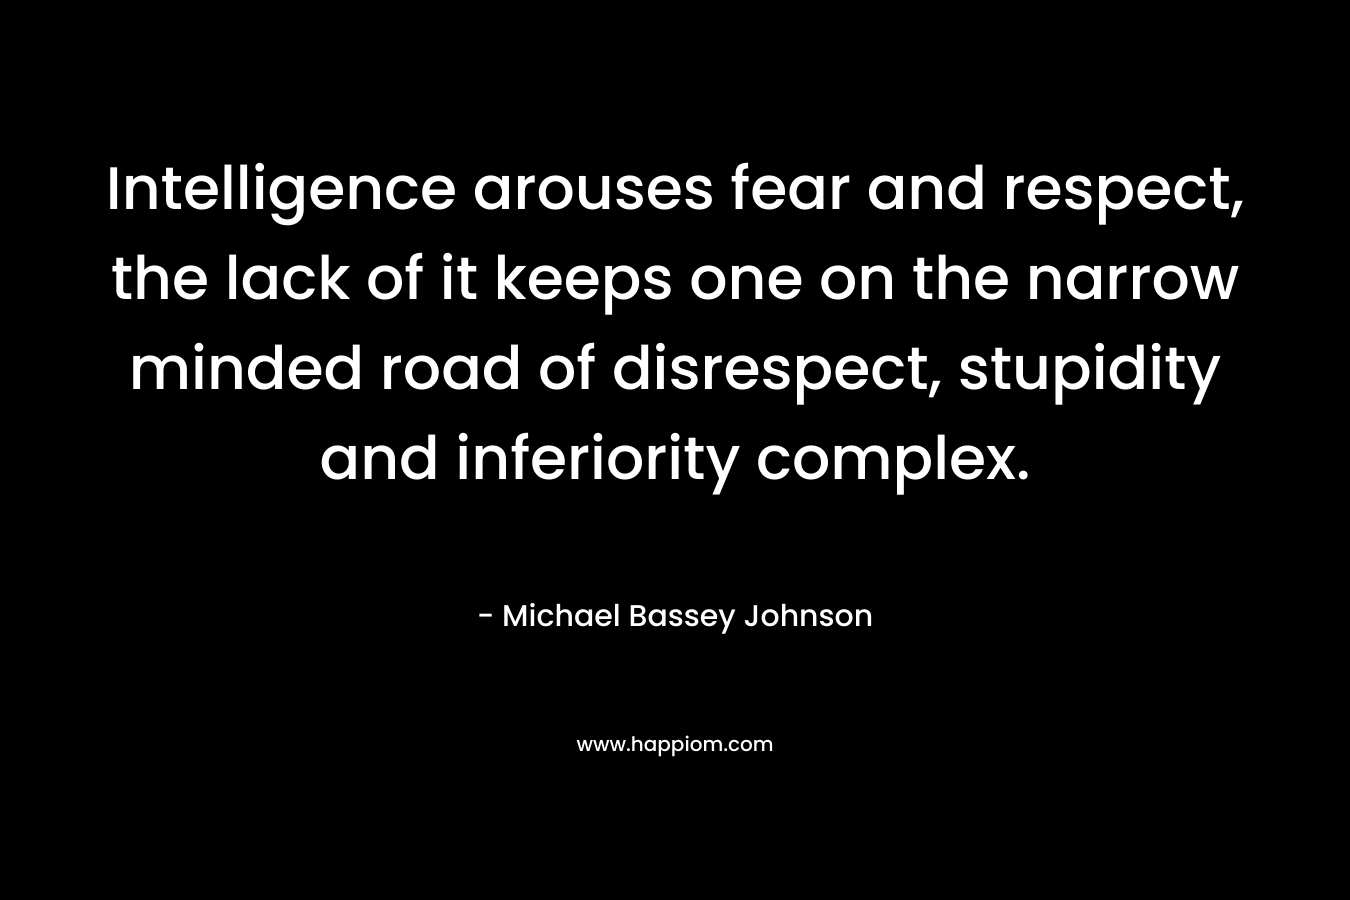 Intelligence arouses fear and respect, the lack of it keeps one on the narrow minded road of disrespect, stupidity and inferiority complex. – Michael Bassey Johnson